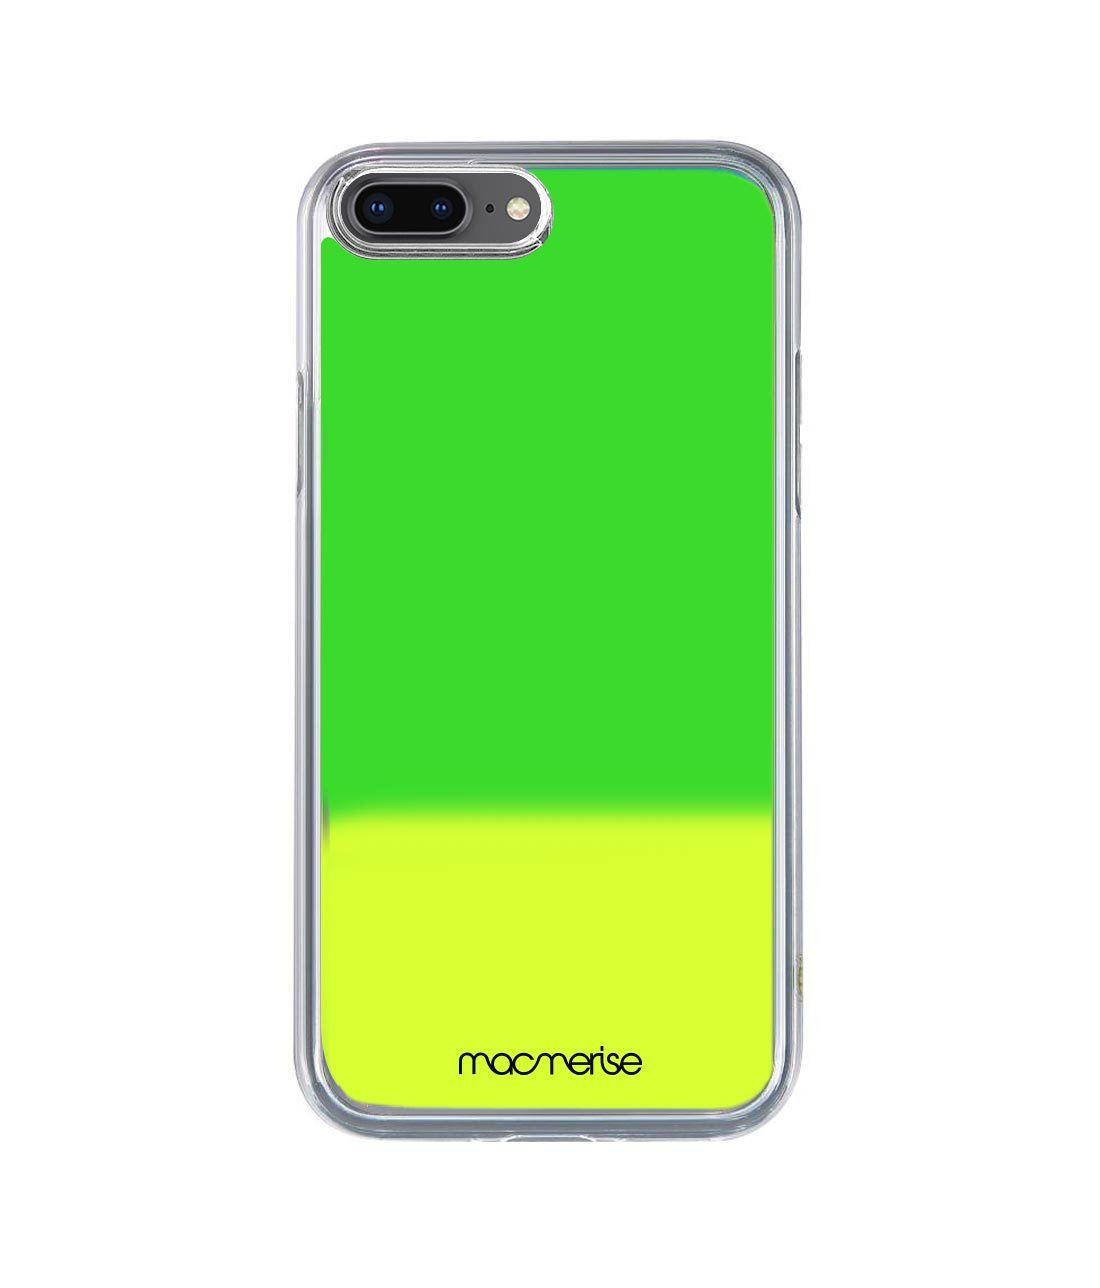 Neon Sand Green - Neon Sand Phone Case for iPhone 8 Plus